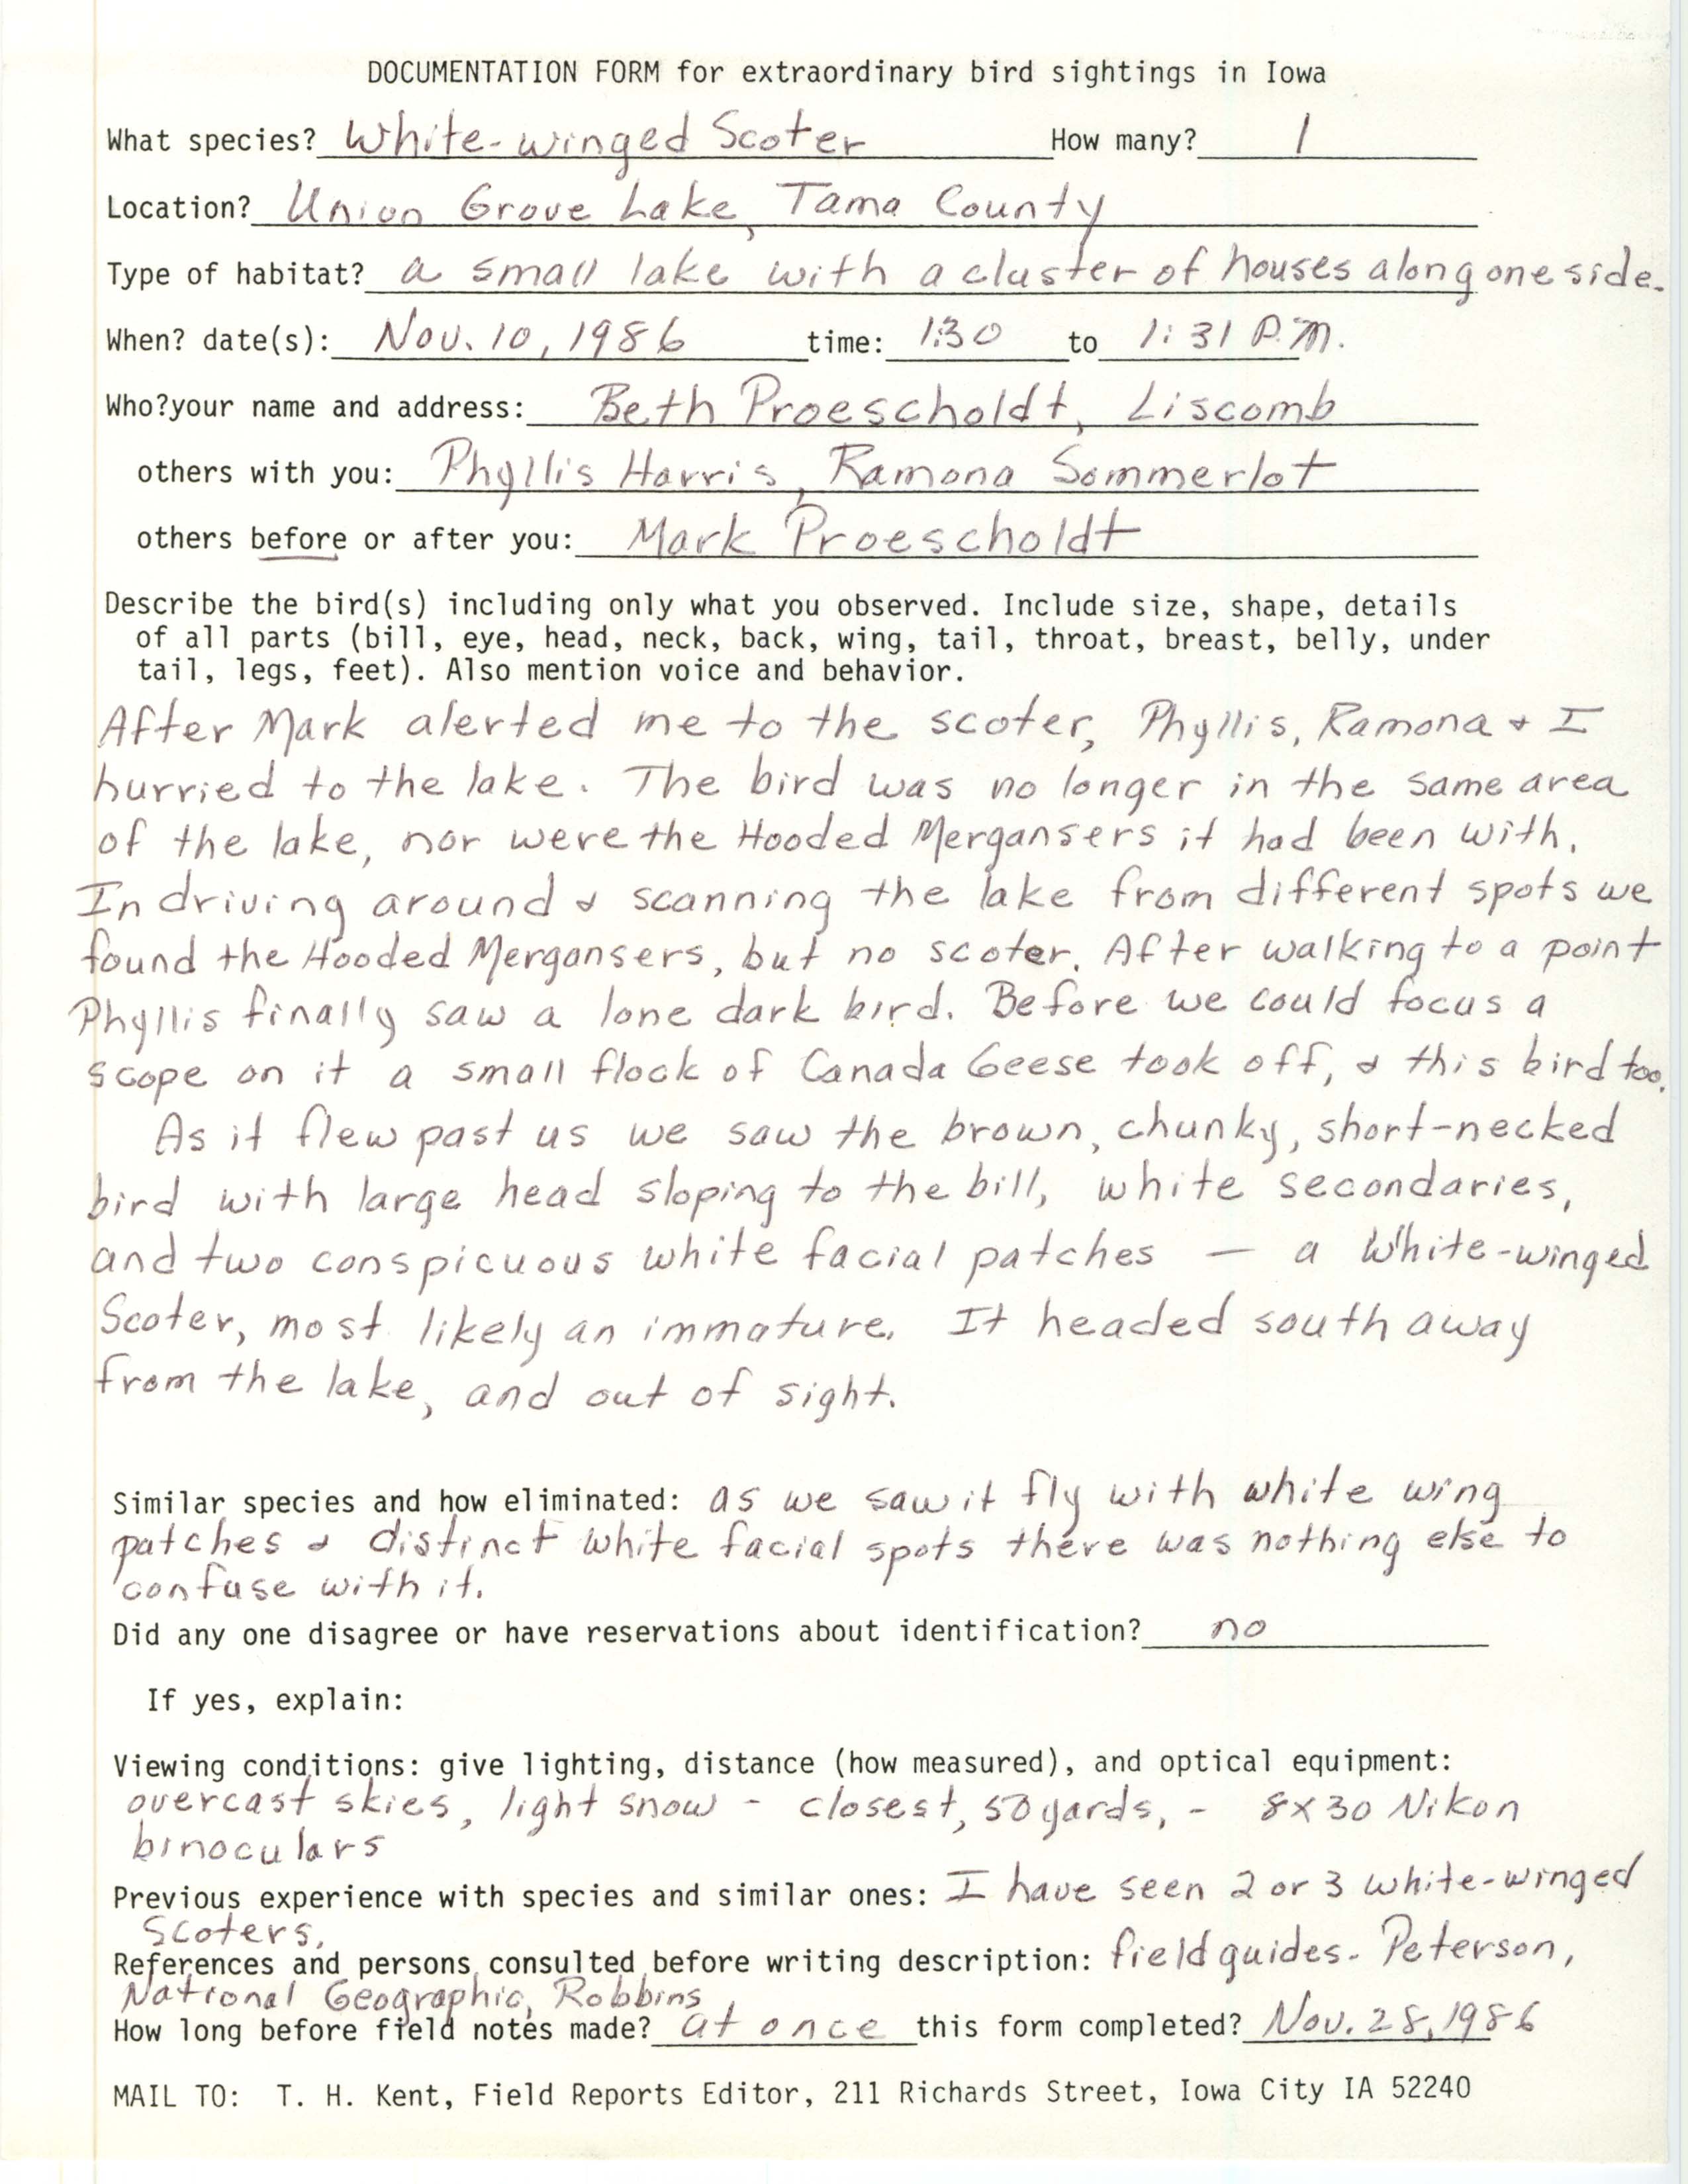 Rare bird documentation form for White-winged Scoter at Union Grove Lake, 1986